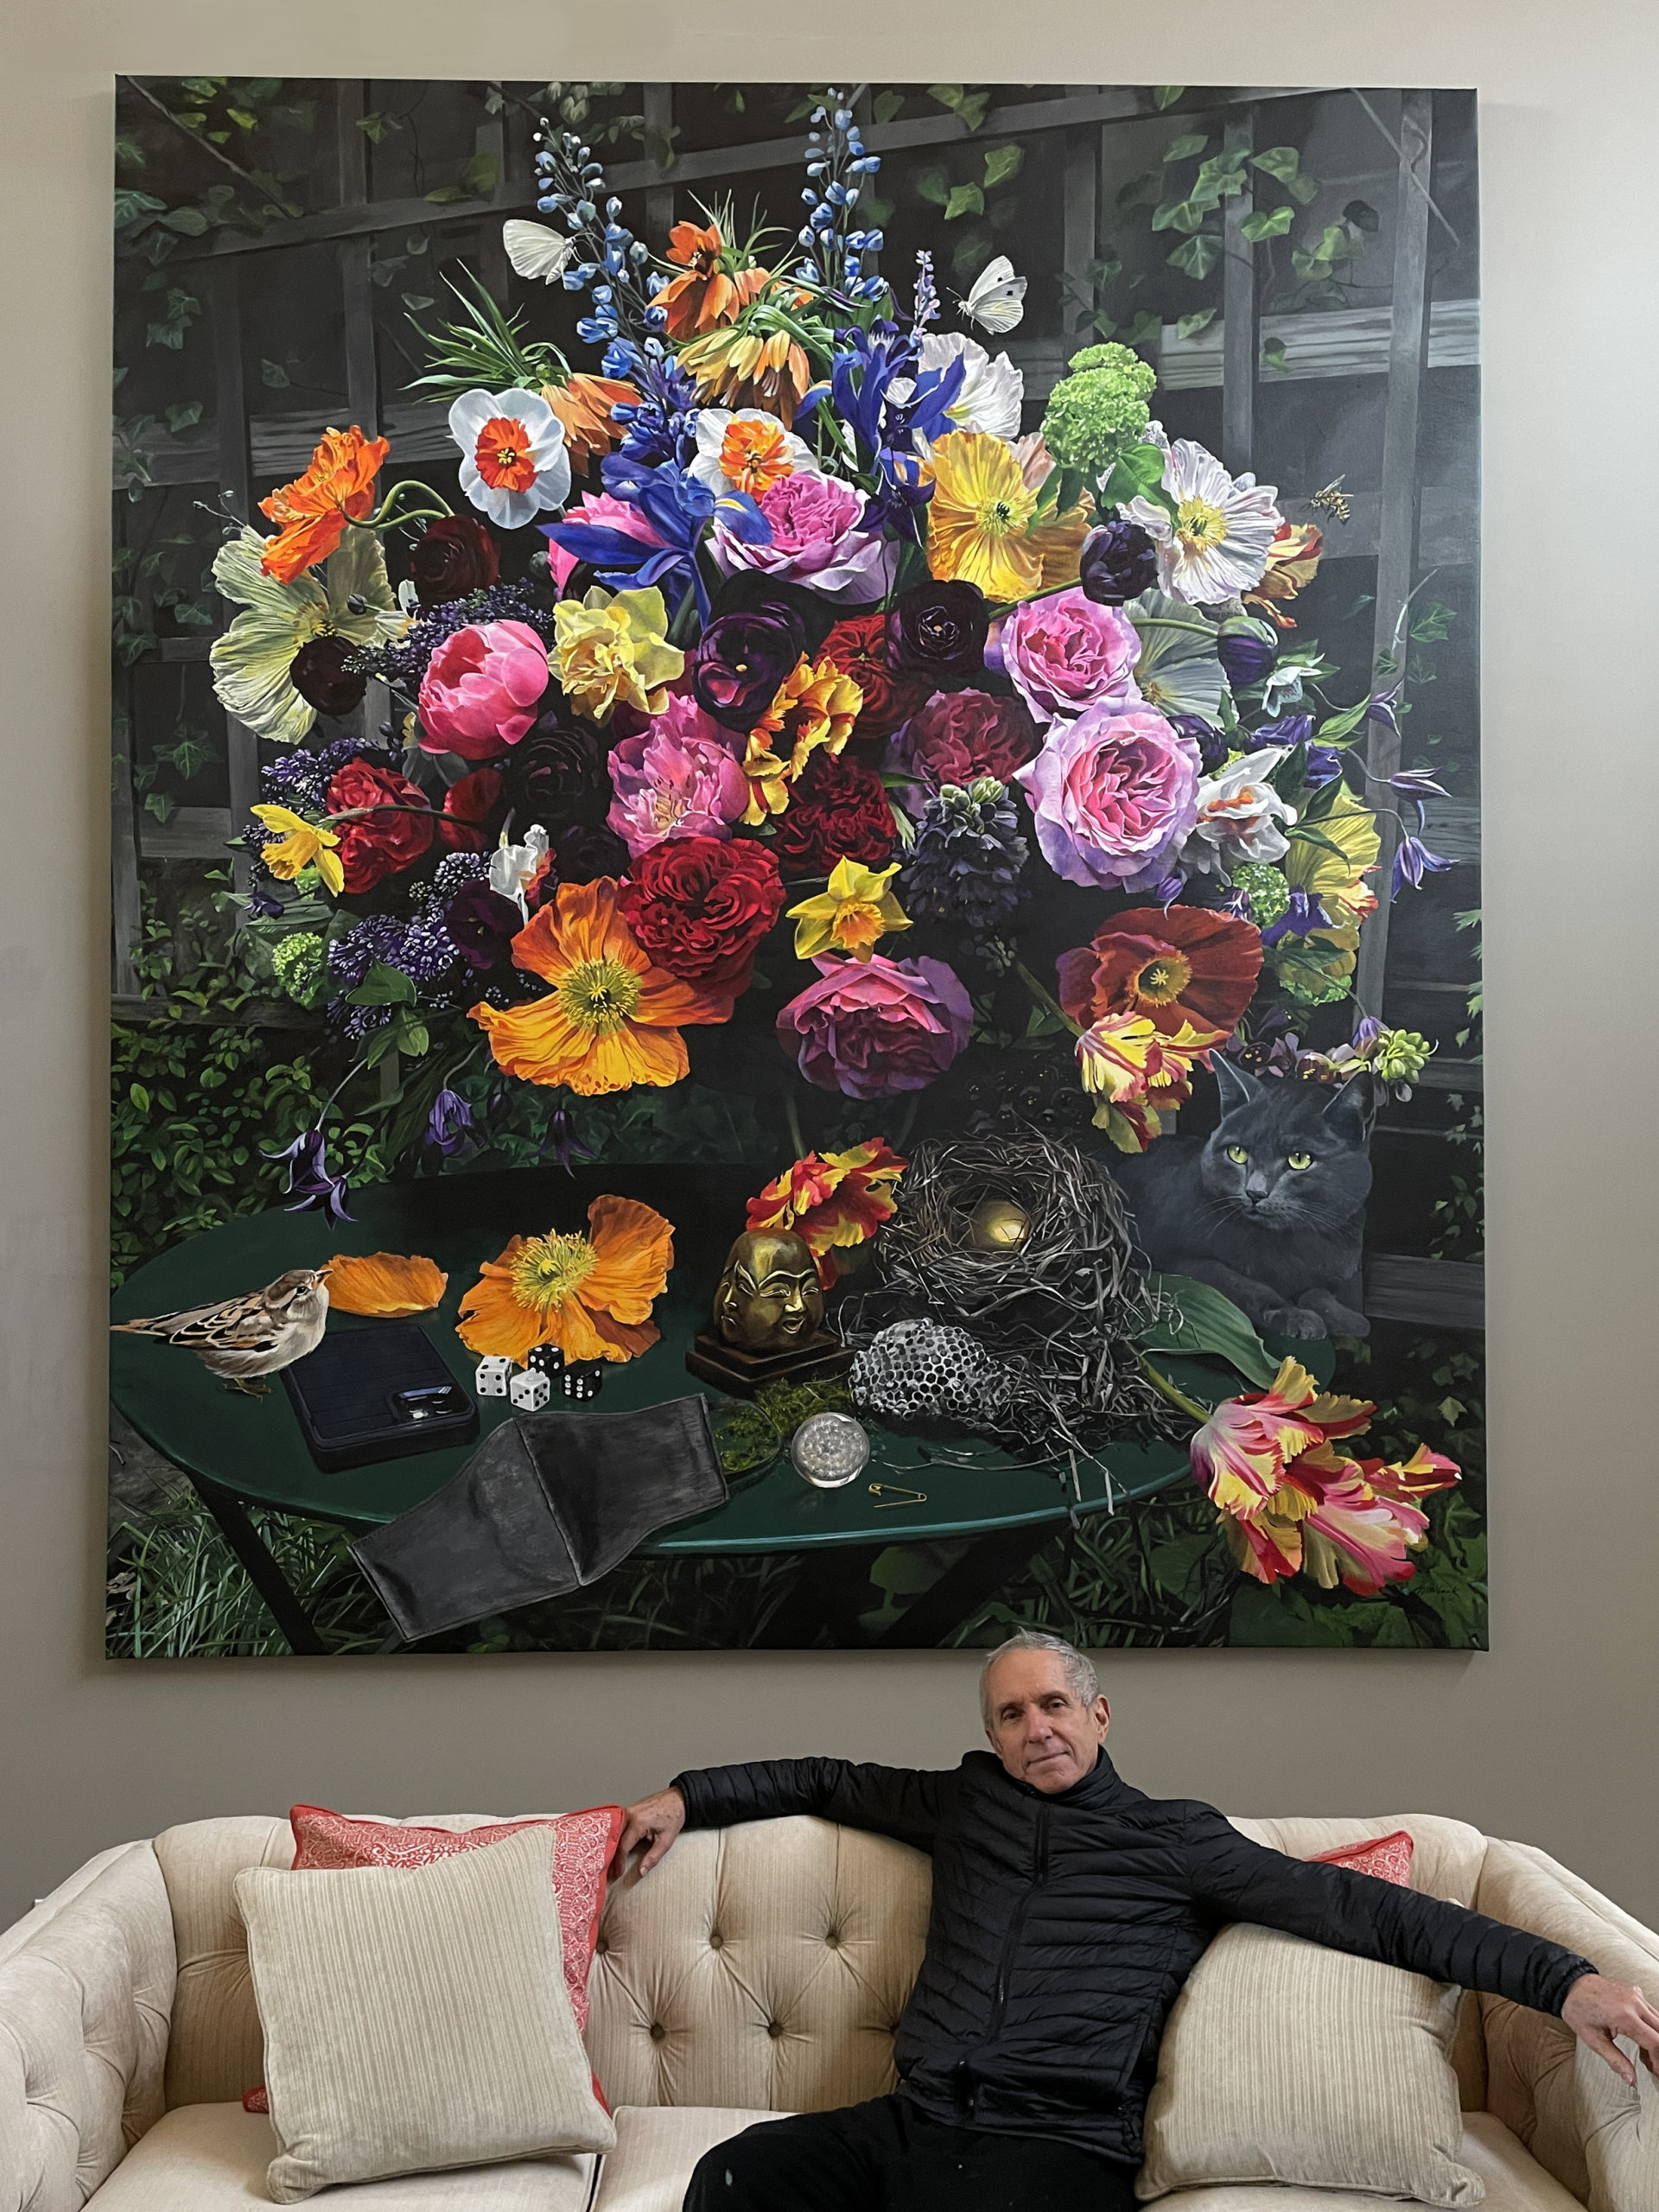 Charles Wildbank with his painting "Grand Florale: 2020"